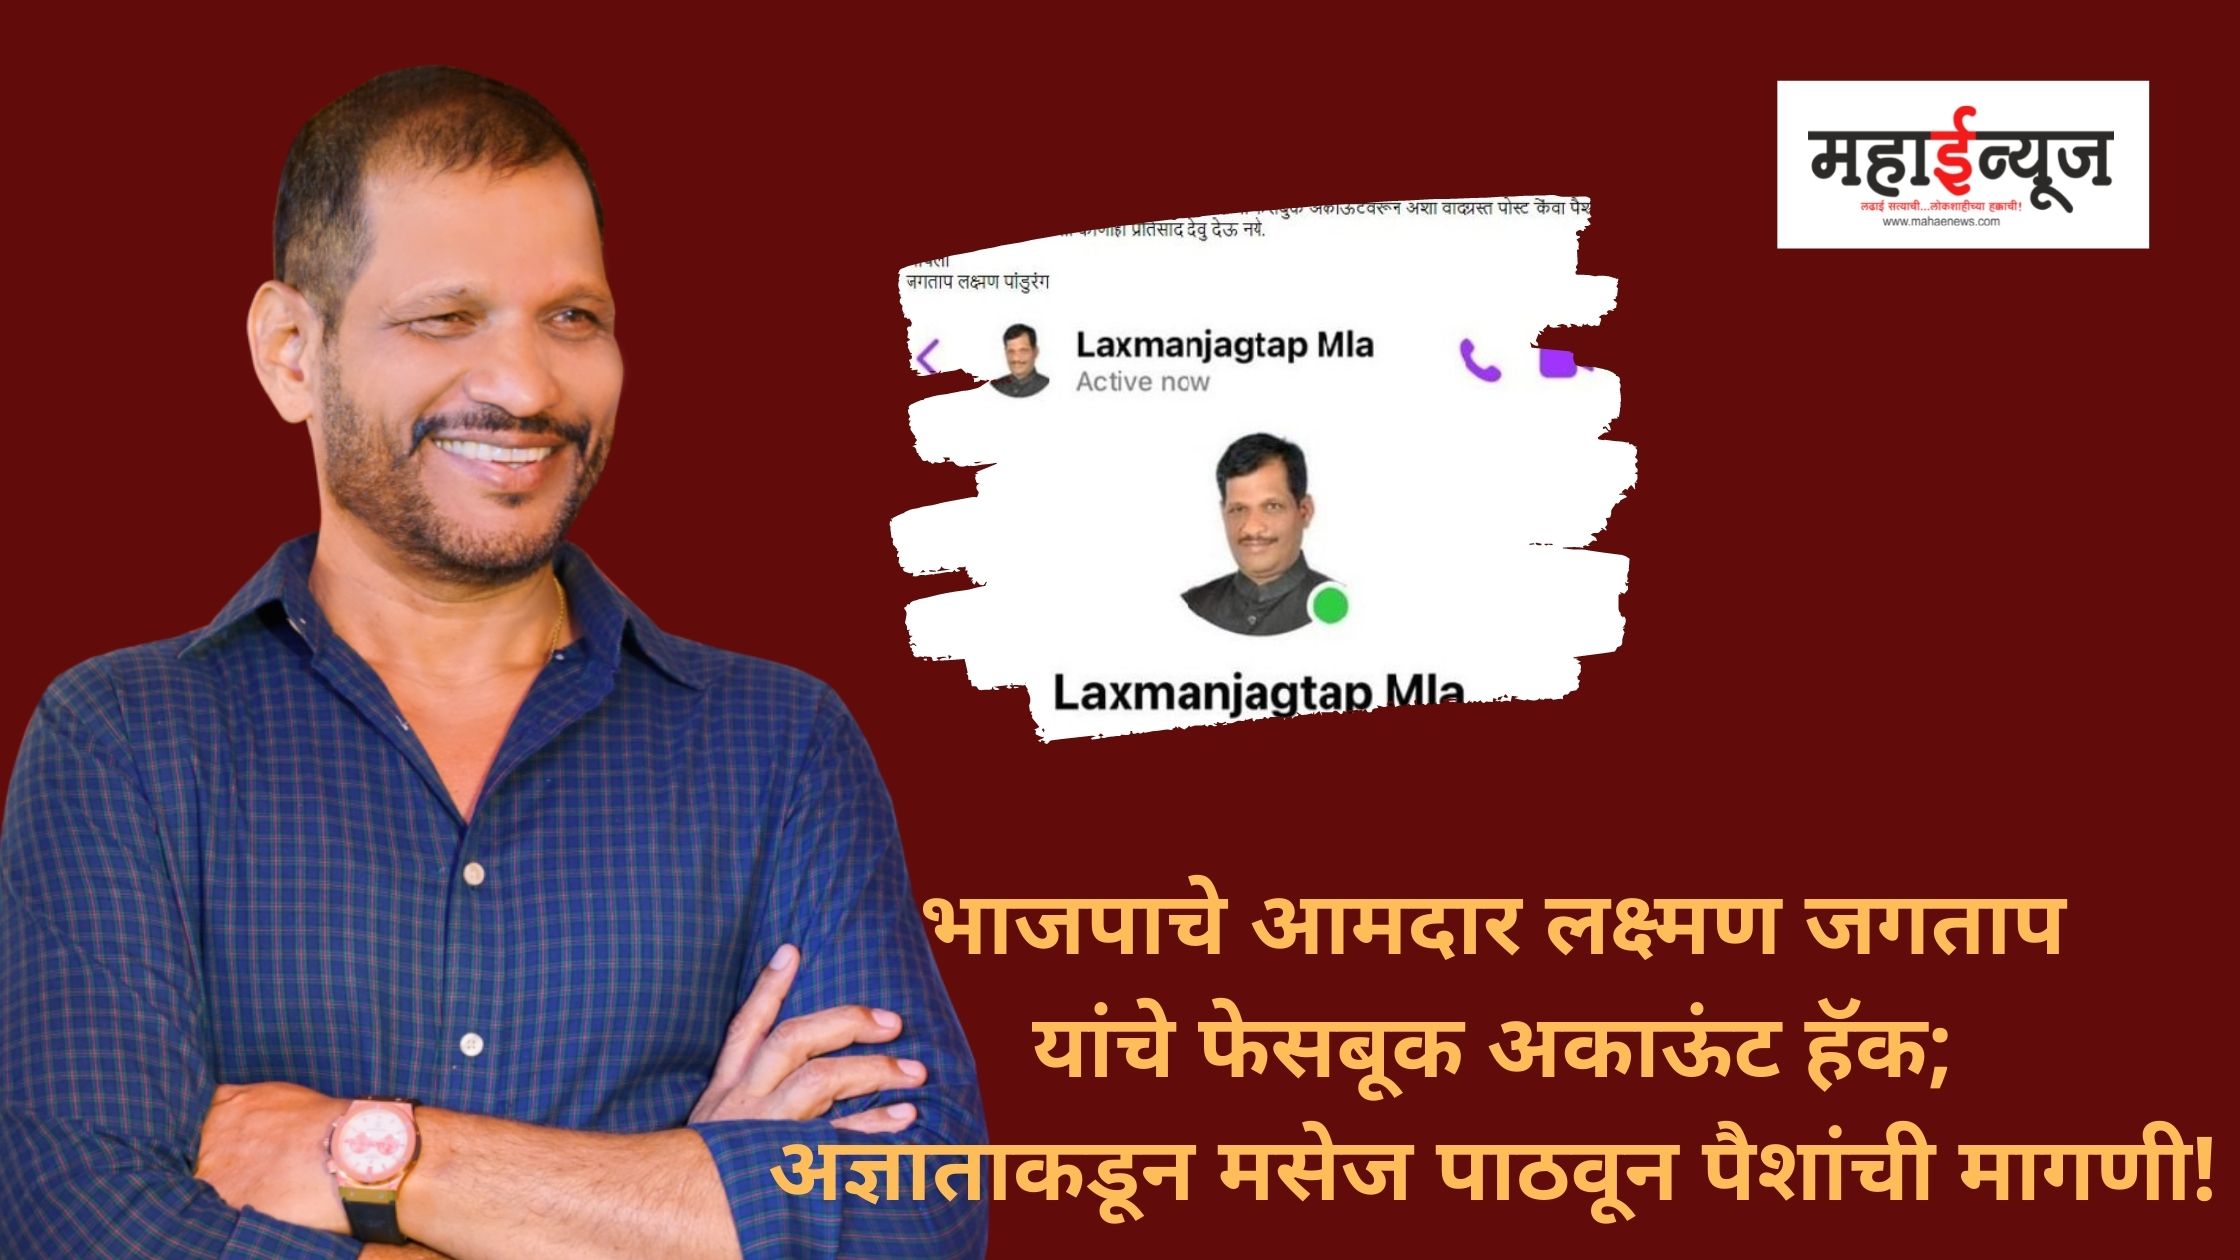 BJP MLA Laxman Jagtap's Facebook account hacked; Demand for money by sending messages from unknown!